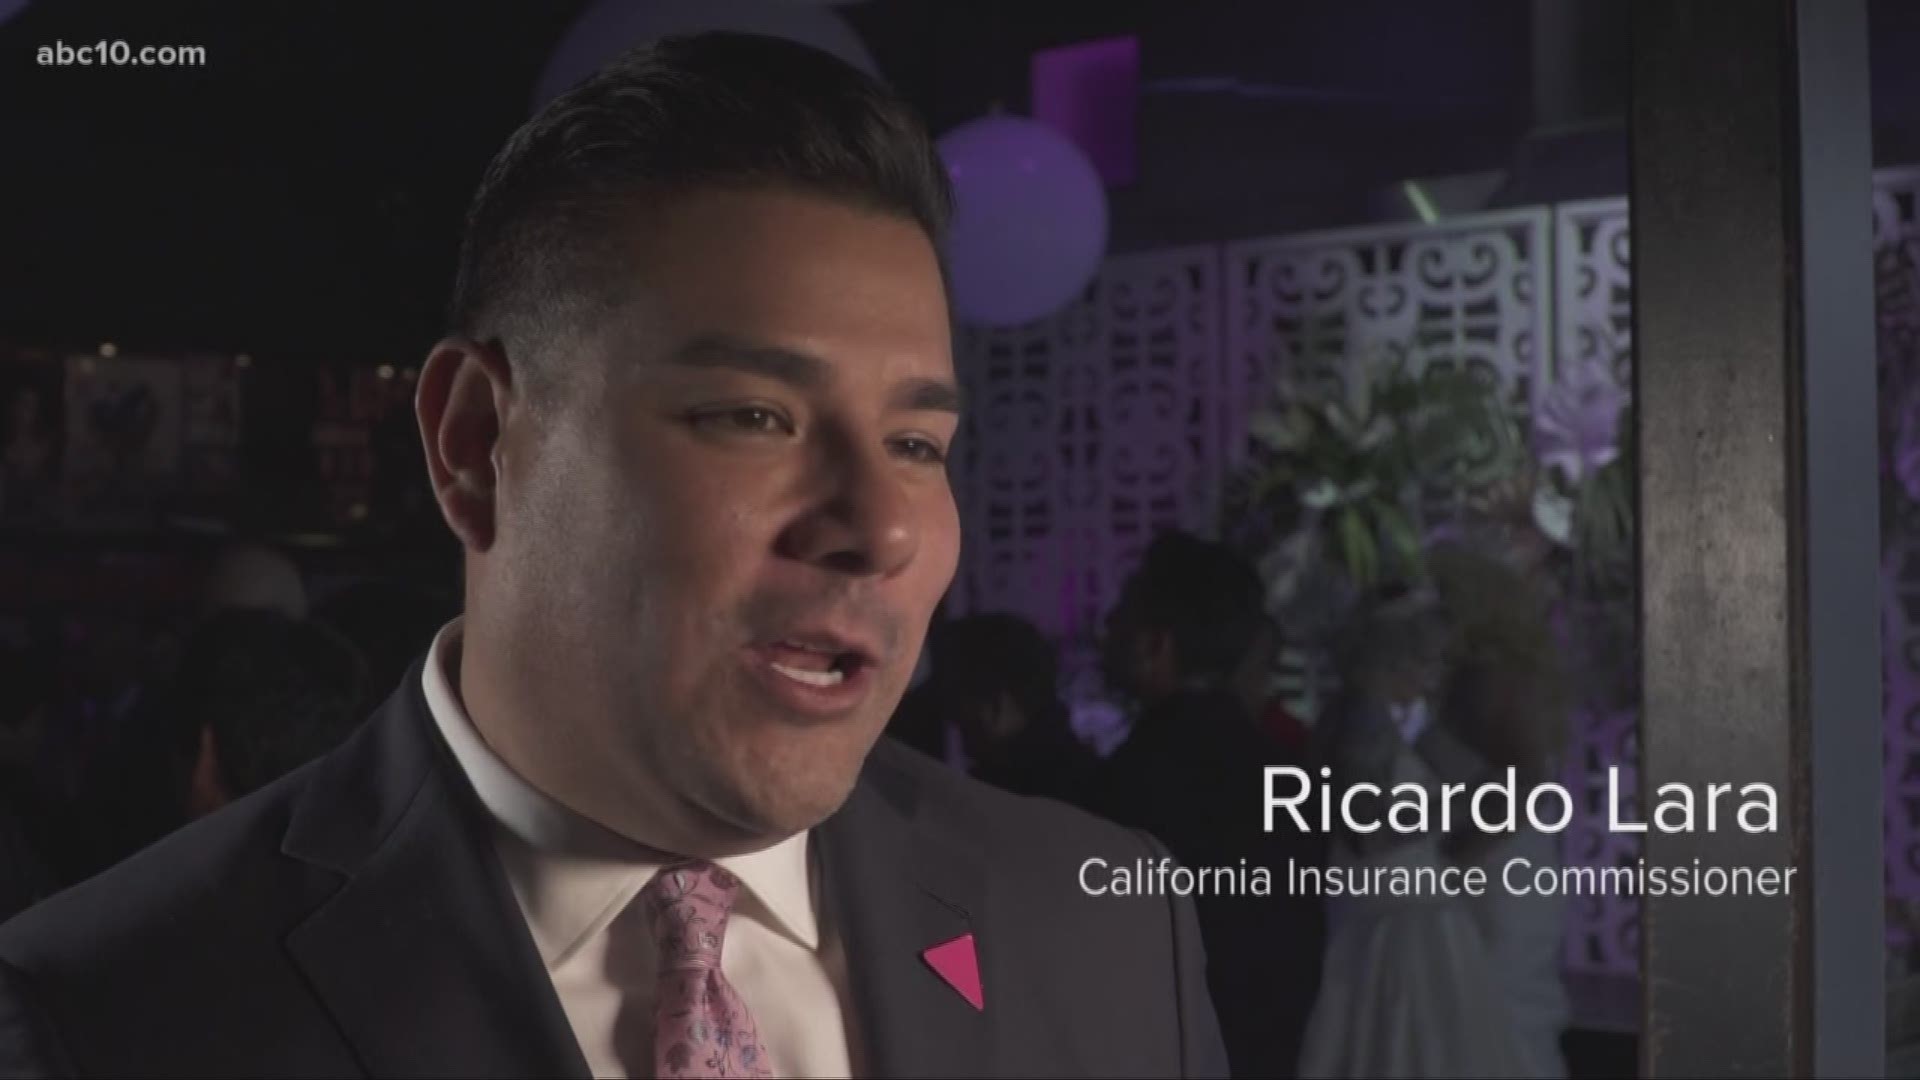 Sworn in on Monday as the new Insurance Commissioner, Ricardo Lara says that California is proof that love is stronger than hate.